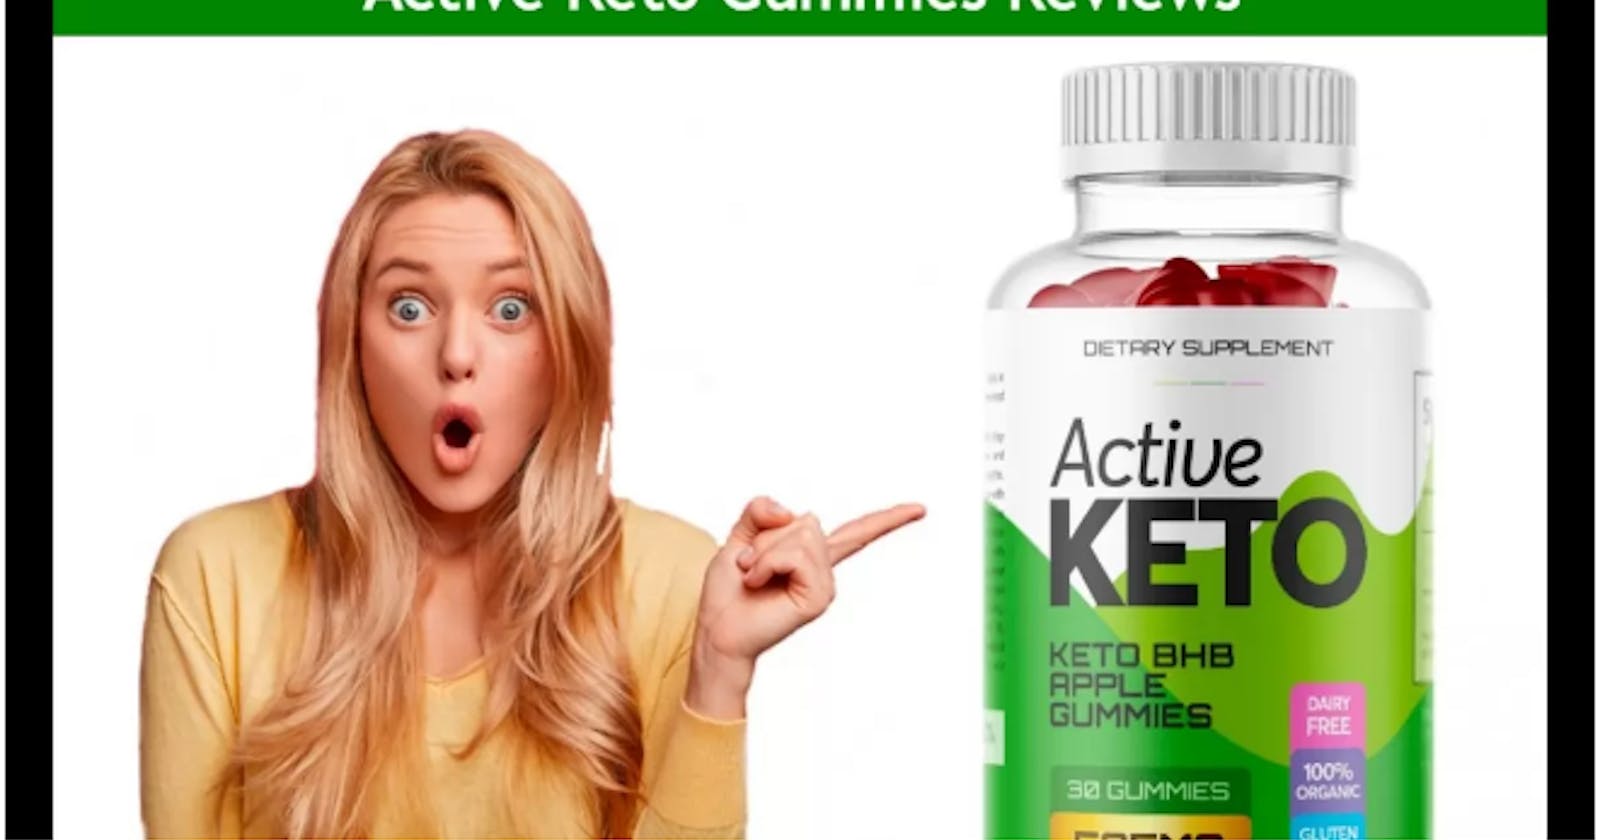 Active Keto Gummies South Africa - User Reviews Exposed Truth About Active Keto Gummies ZA!